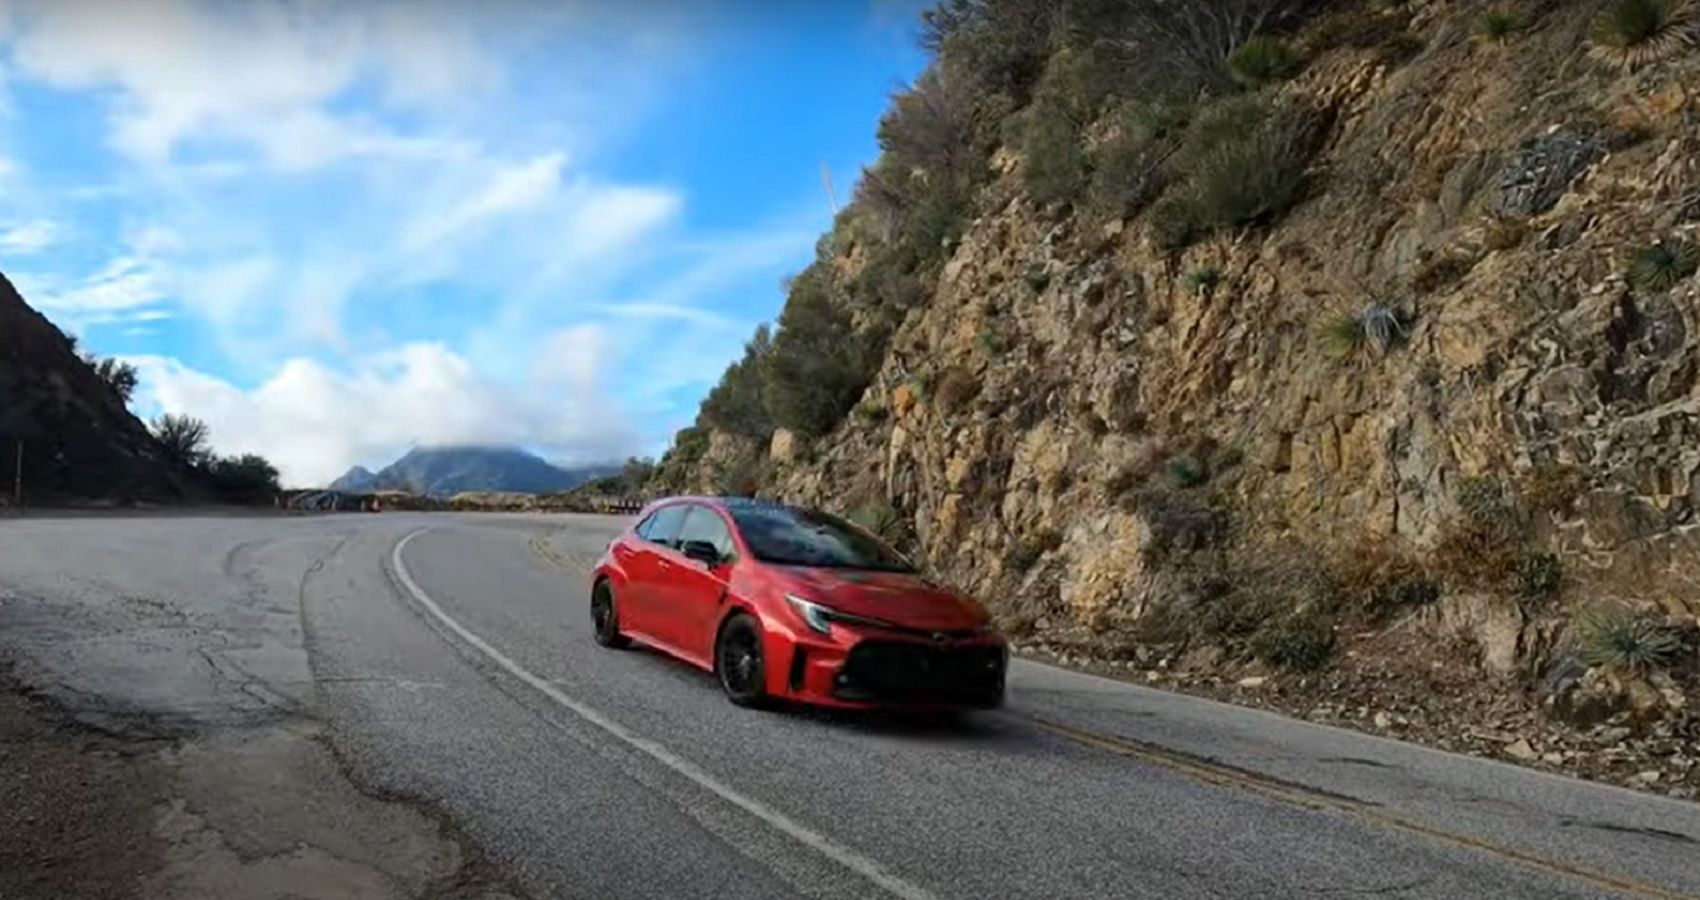 The new Toyota GR Corolla being tested for smoked tires in a California canyon